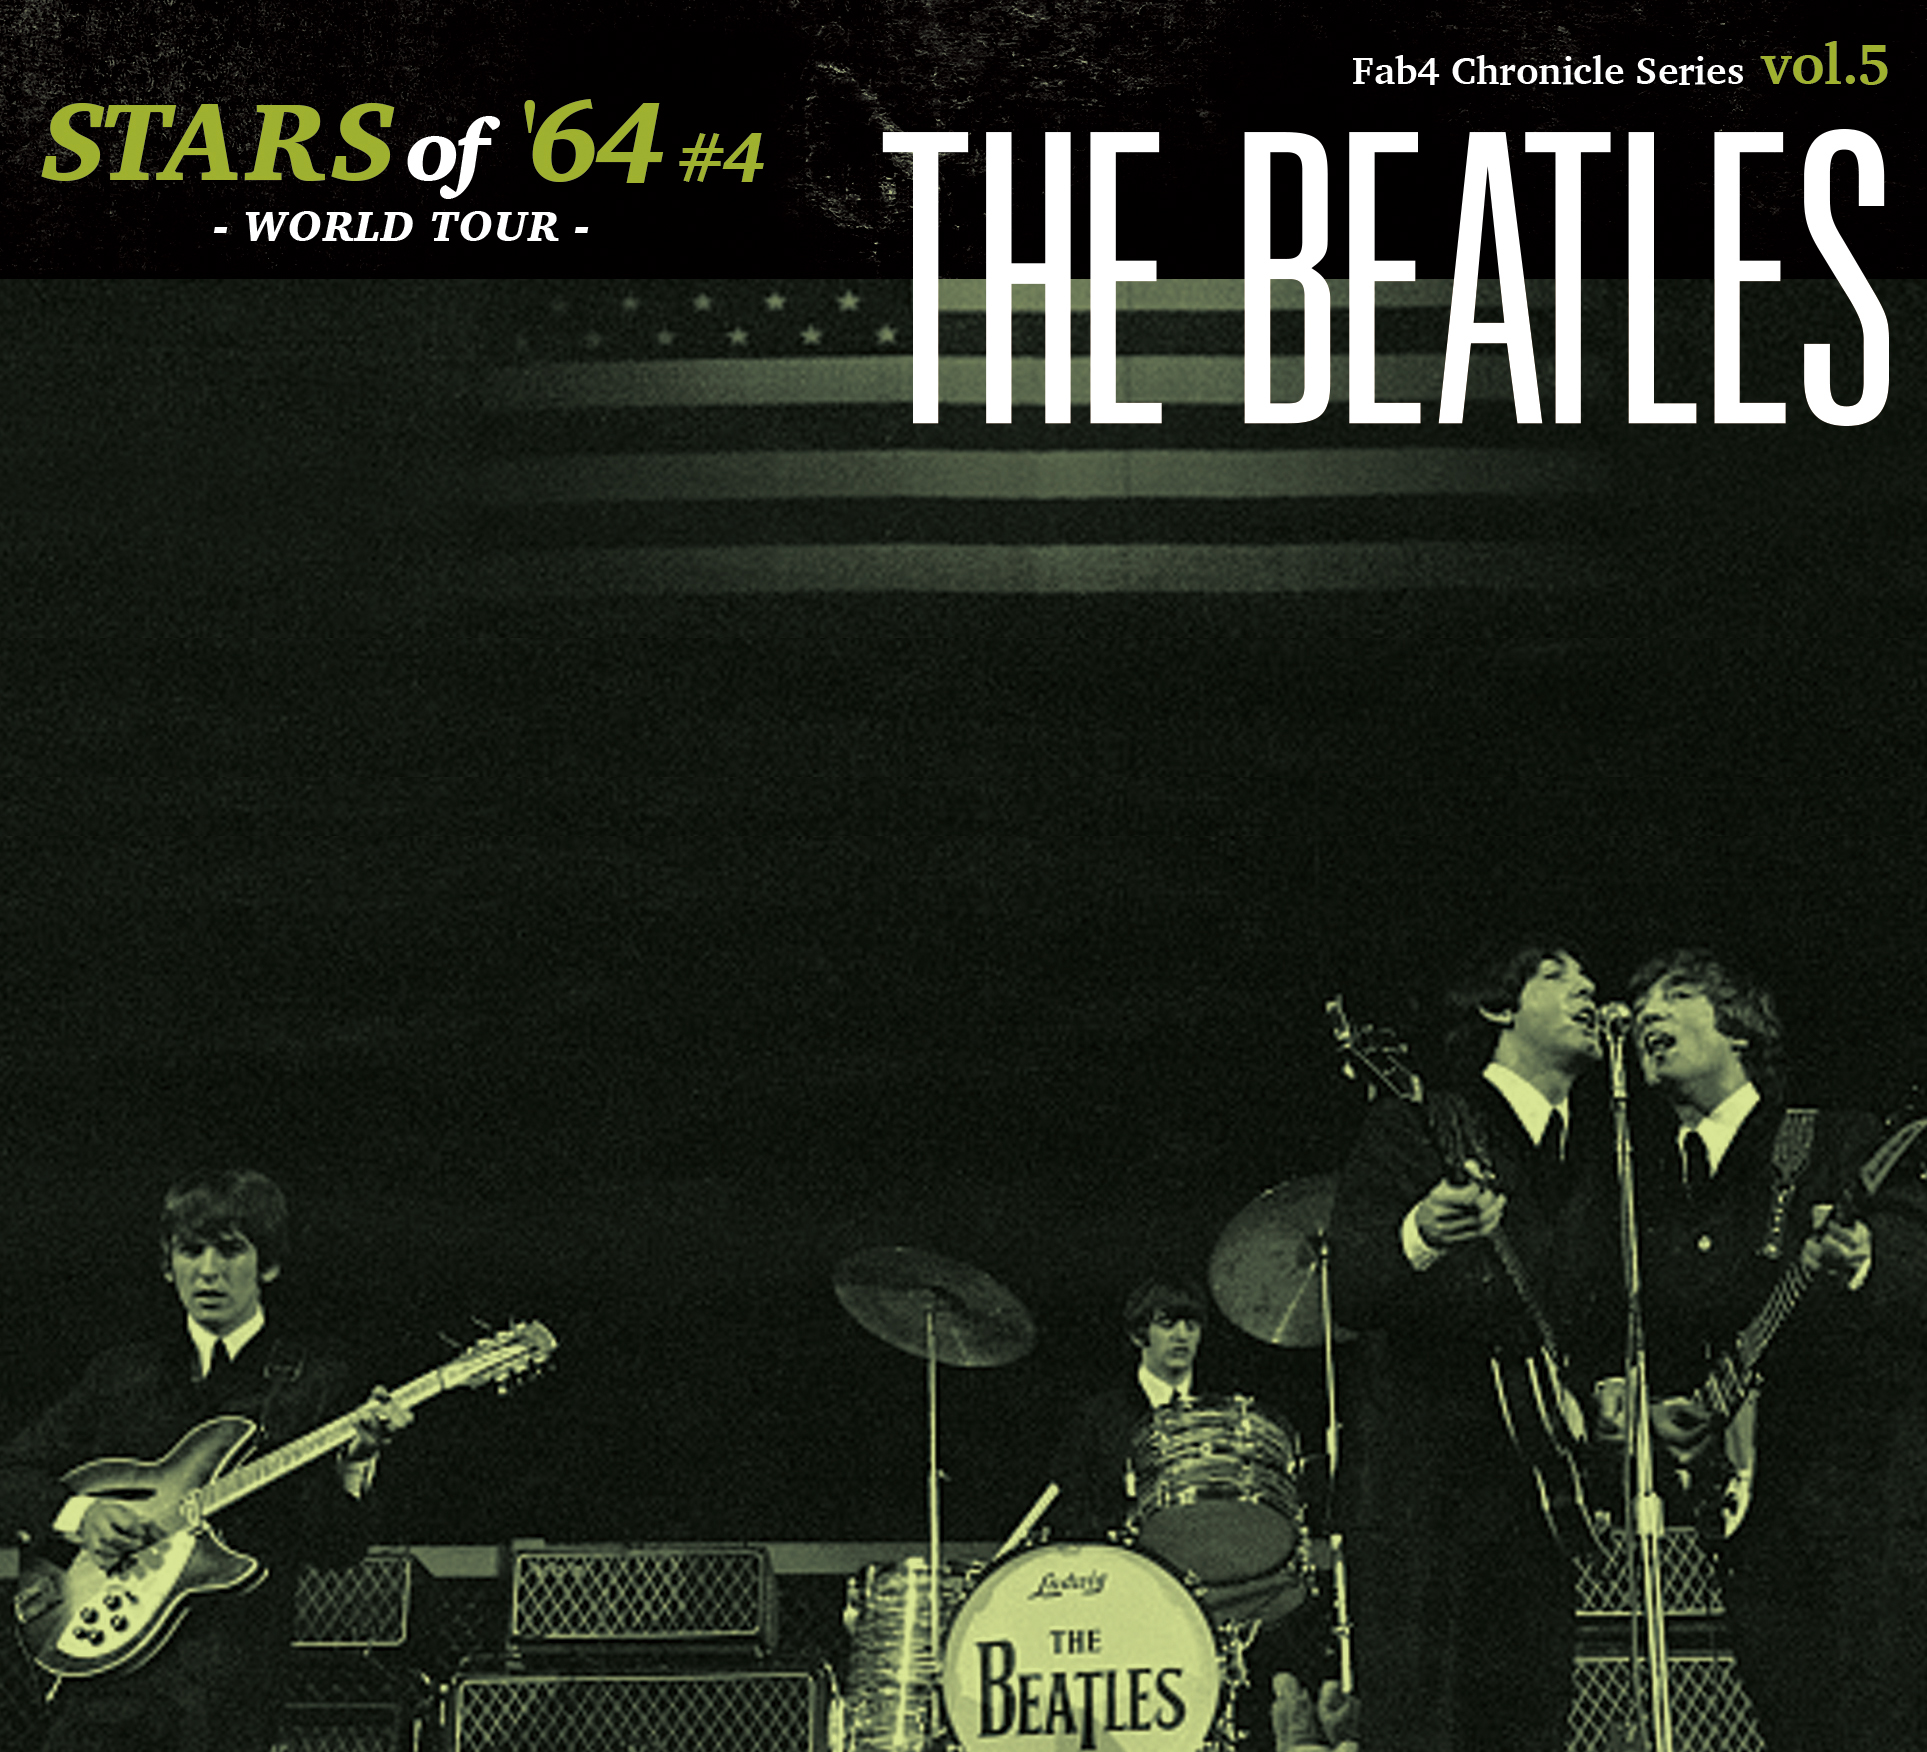 THE BEATLES / STARS of ’64 #4 Fab Chronicle Series vol.5